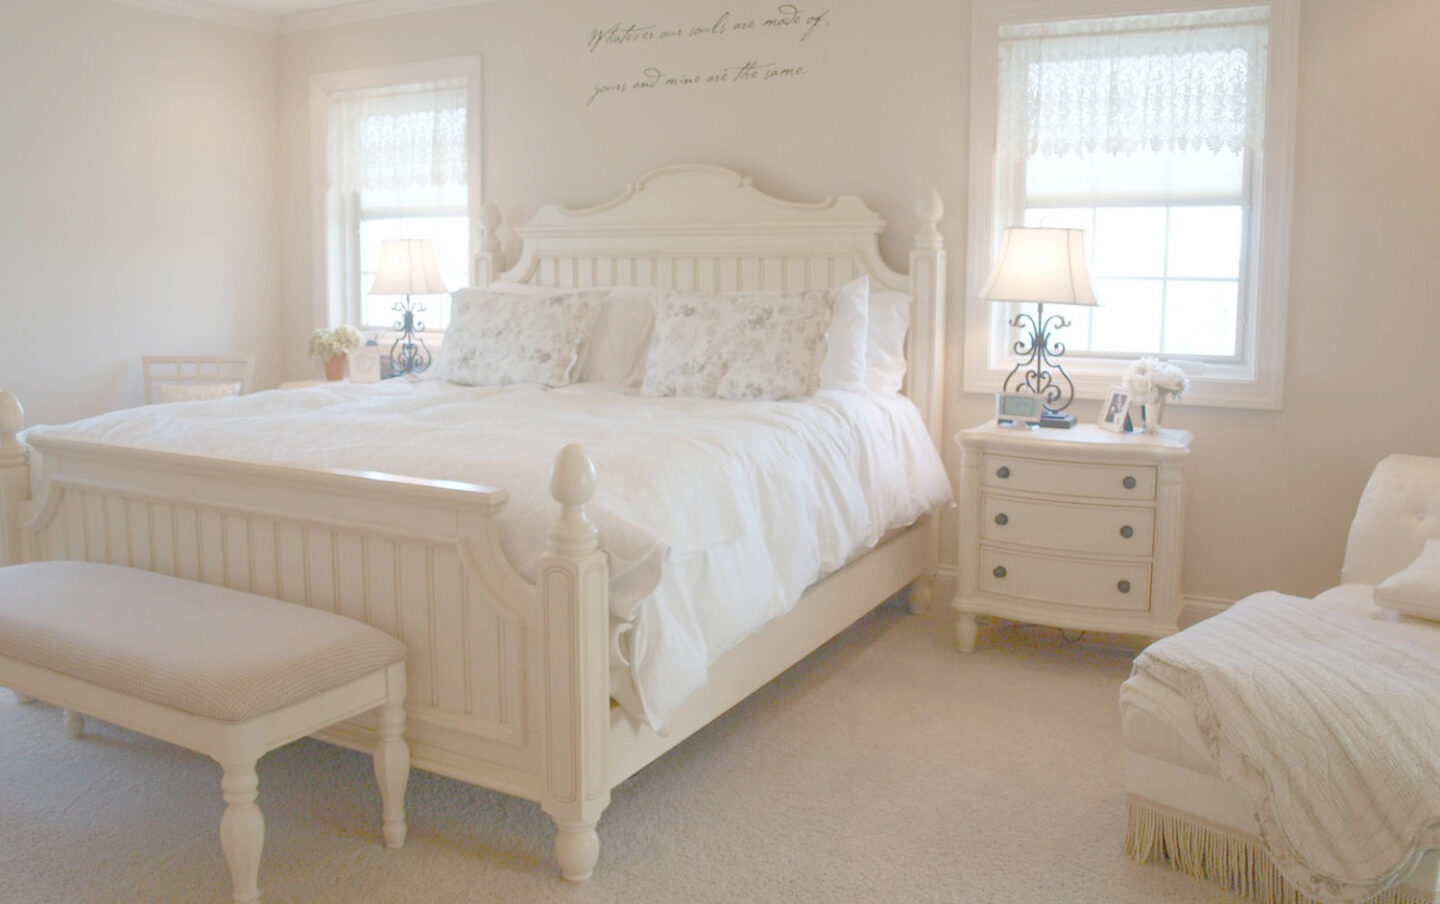 BM White Sand in our French country white bedroom - Hello Lovely Studio. #bmwhitesand